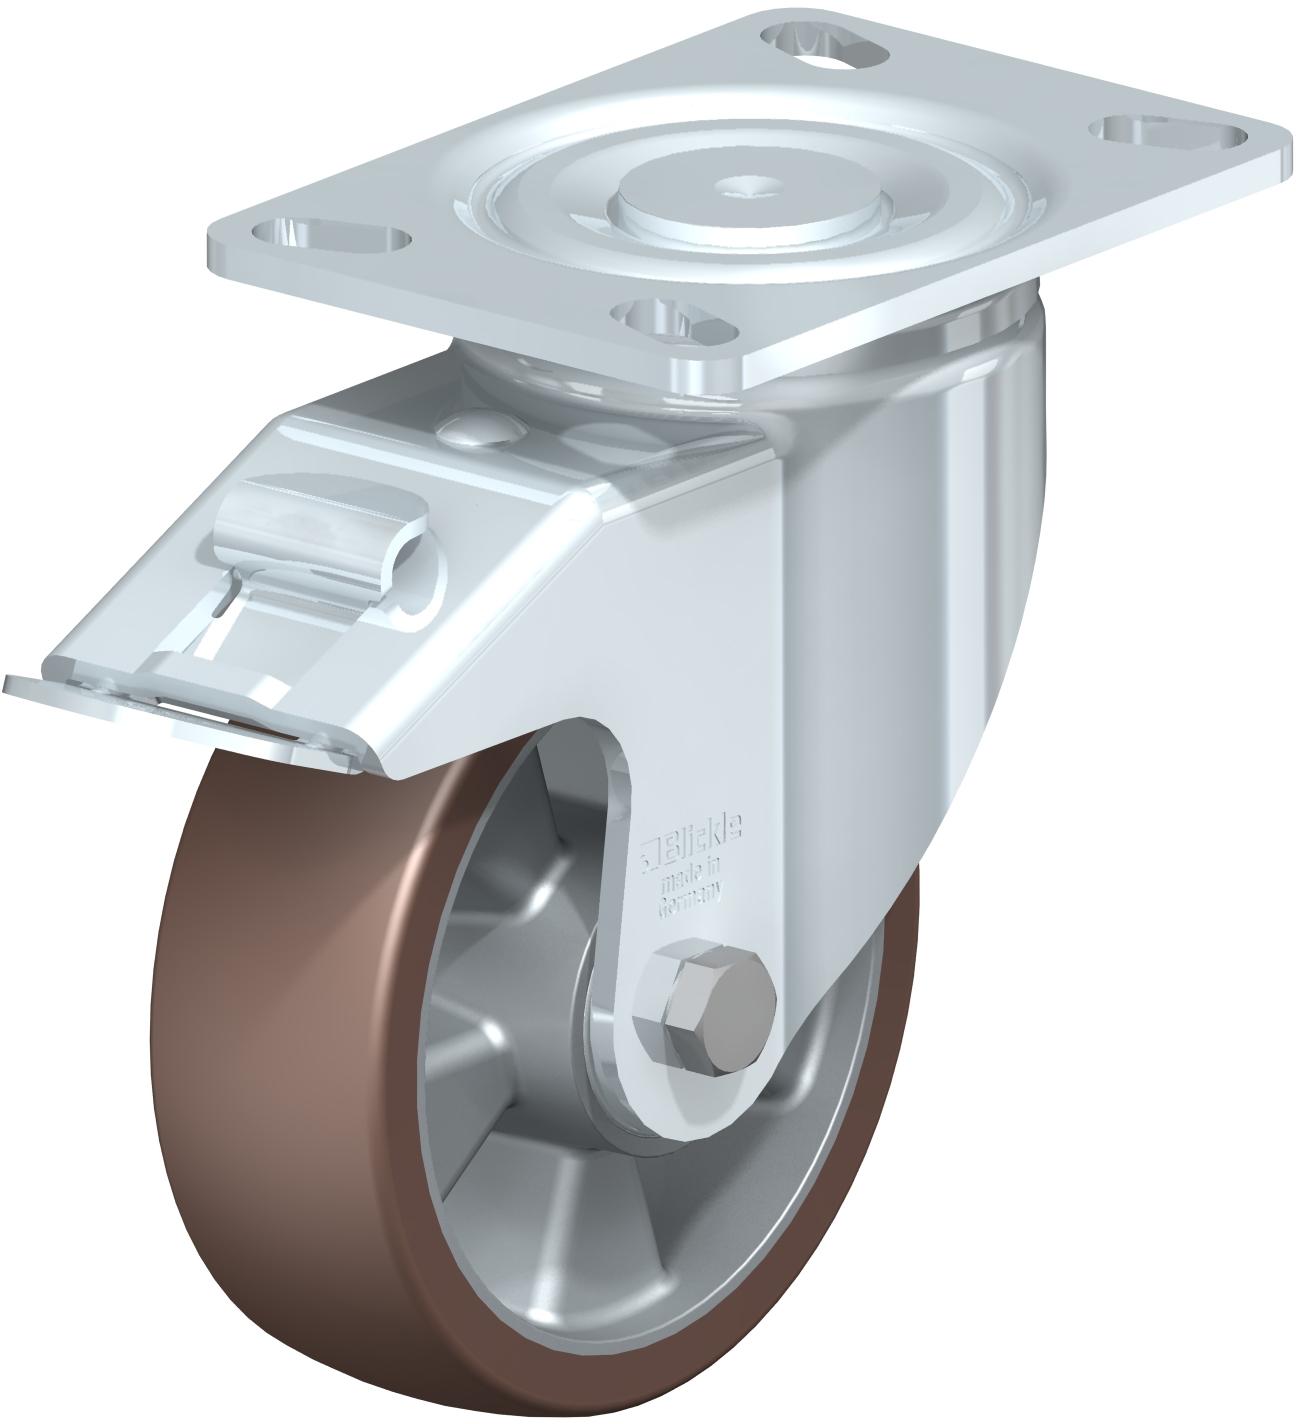 Heavy Duty Industrial Large Top Plate Casters - Swivel, Ball Bearing, Blickle Besthane Brown Polyurethane Tread On Aluminum Core Wheel, Stop-Fix Brake